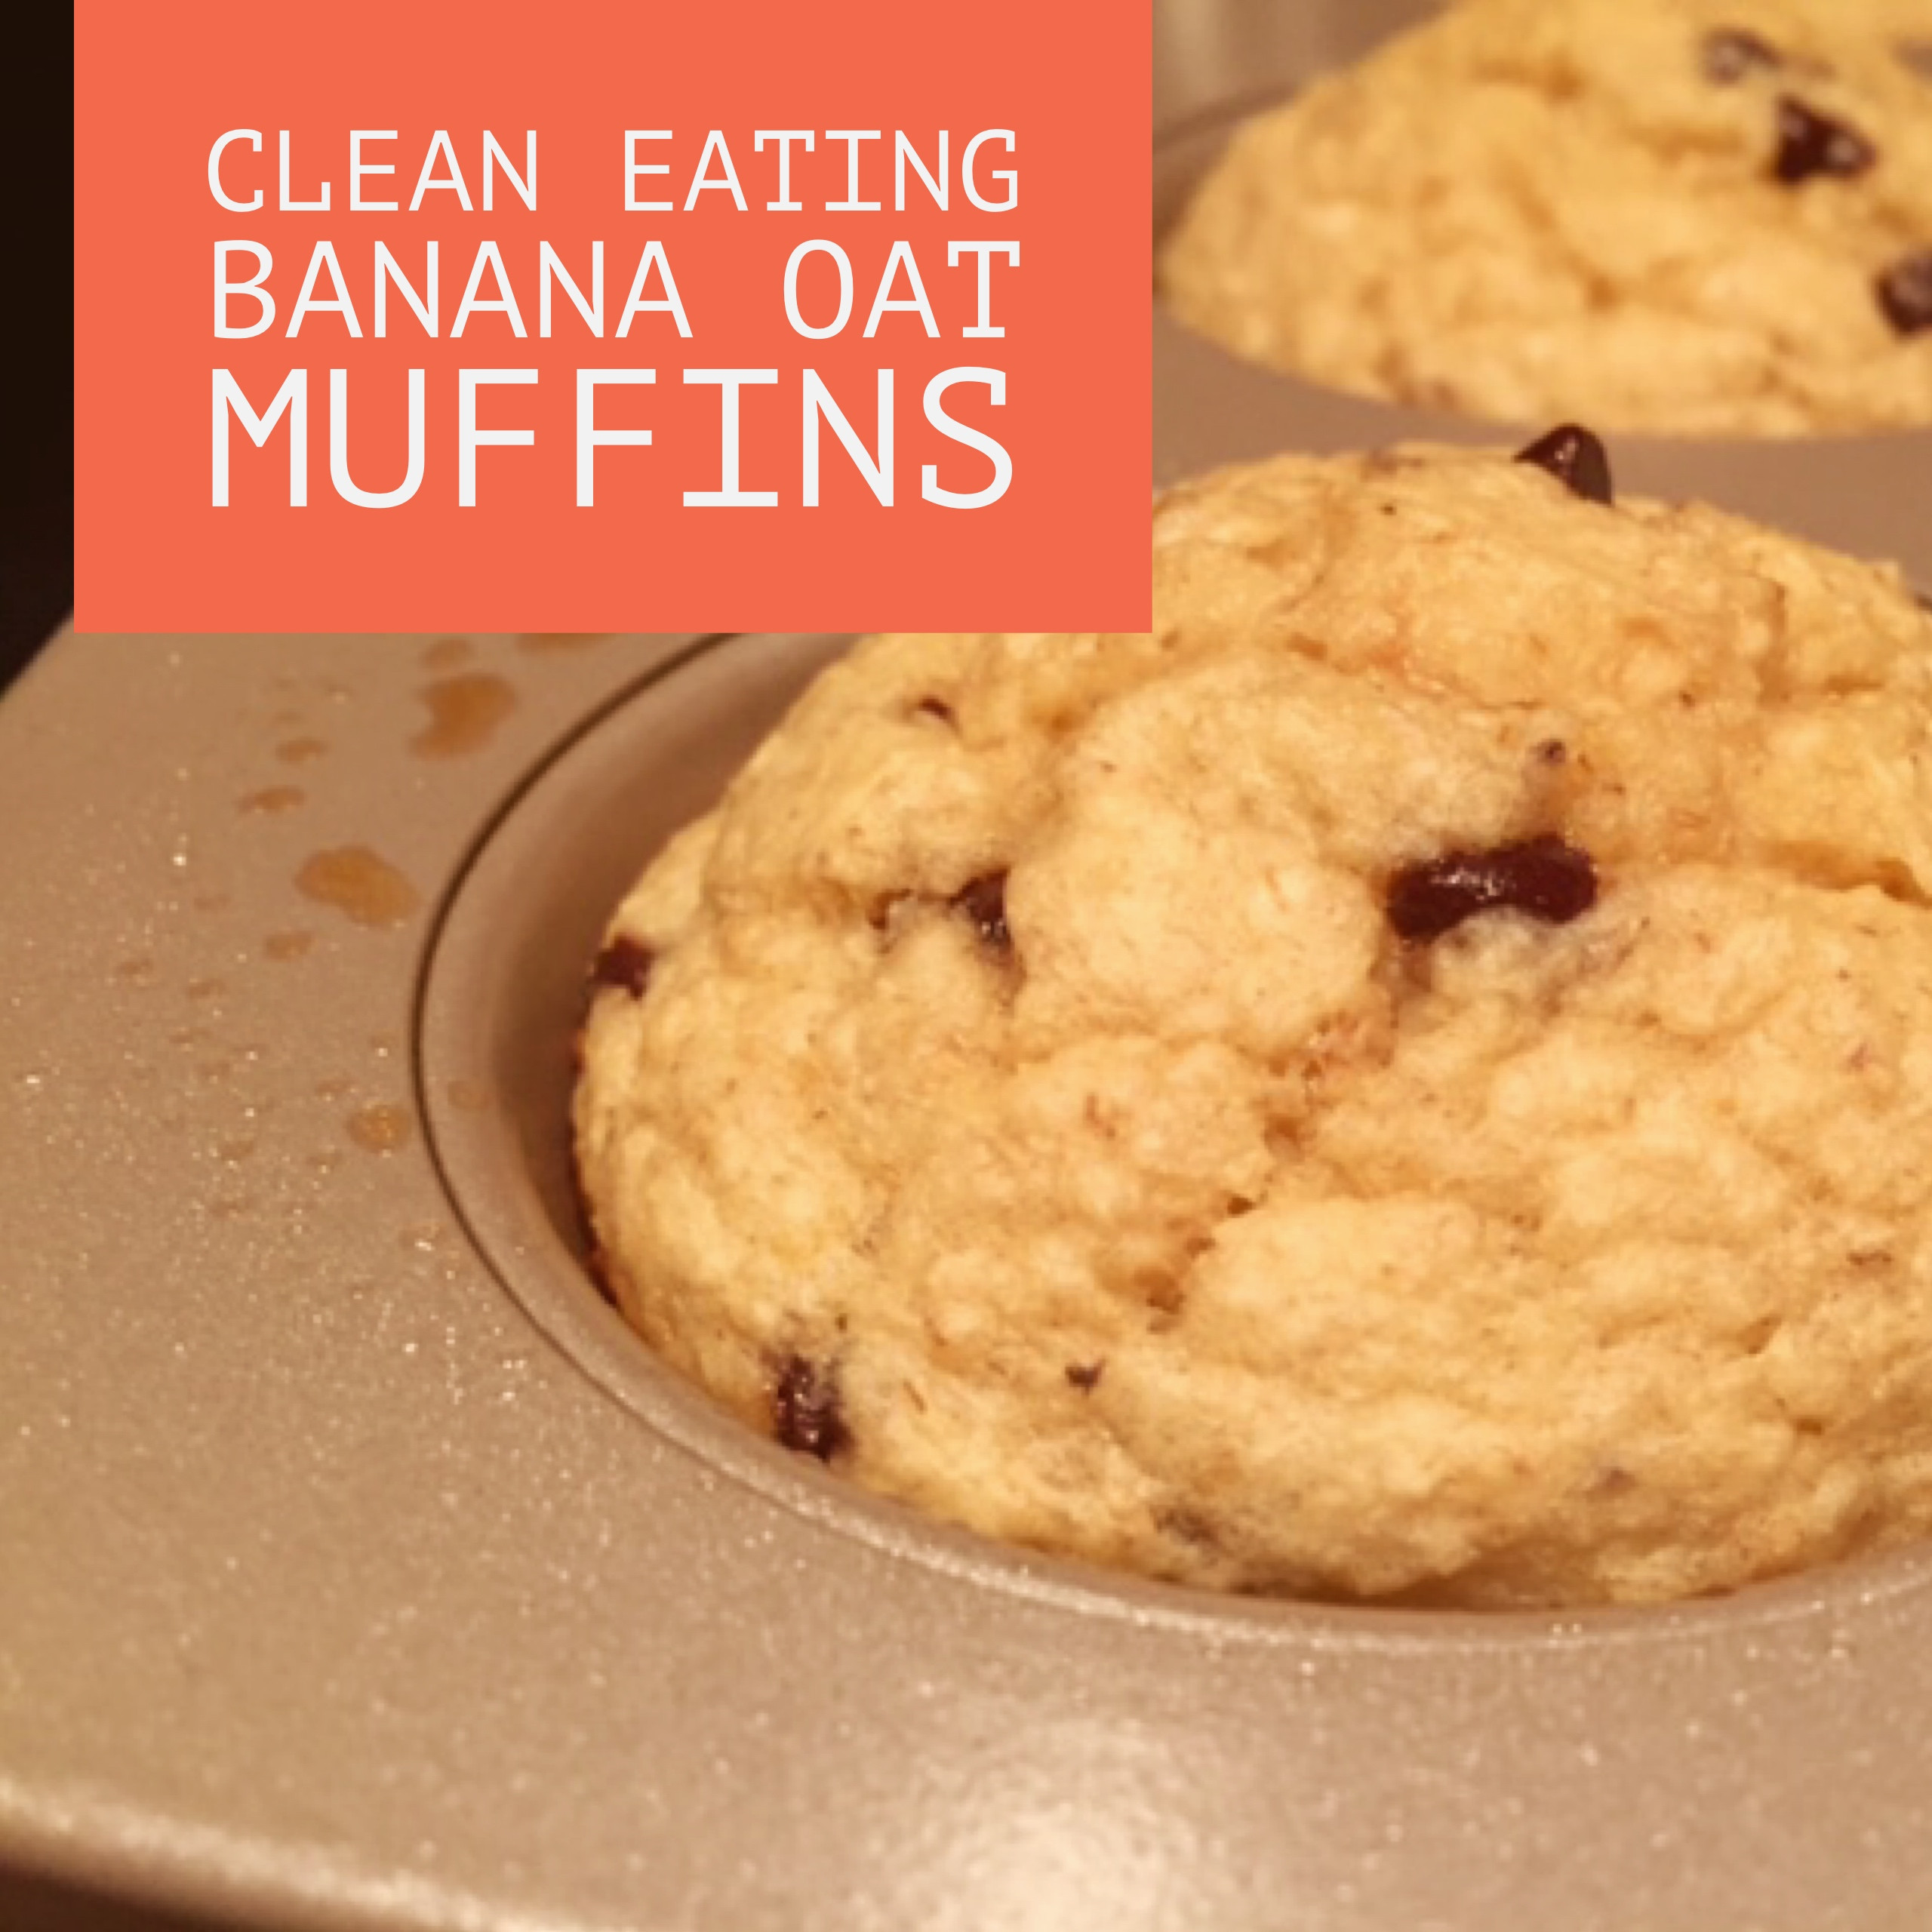 Clean Eating Banana Muffins
 Clean Eating Banana Muffins gluten free finding time